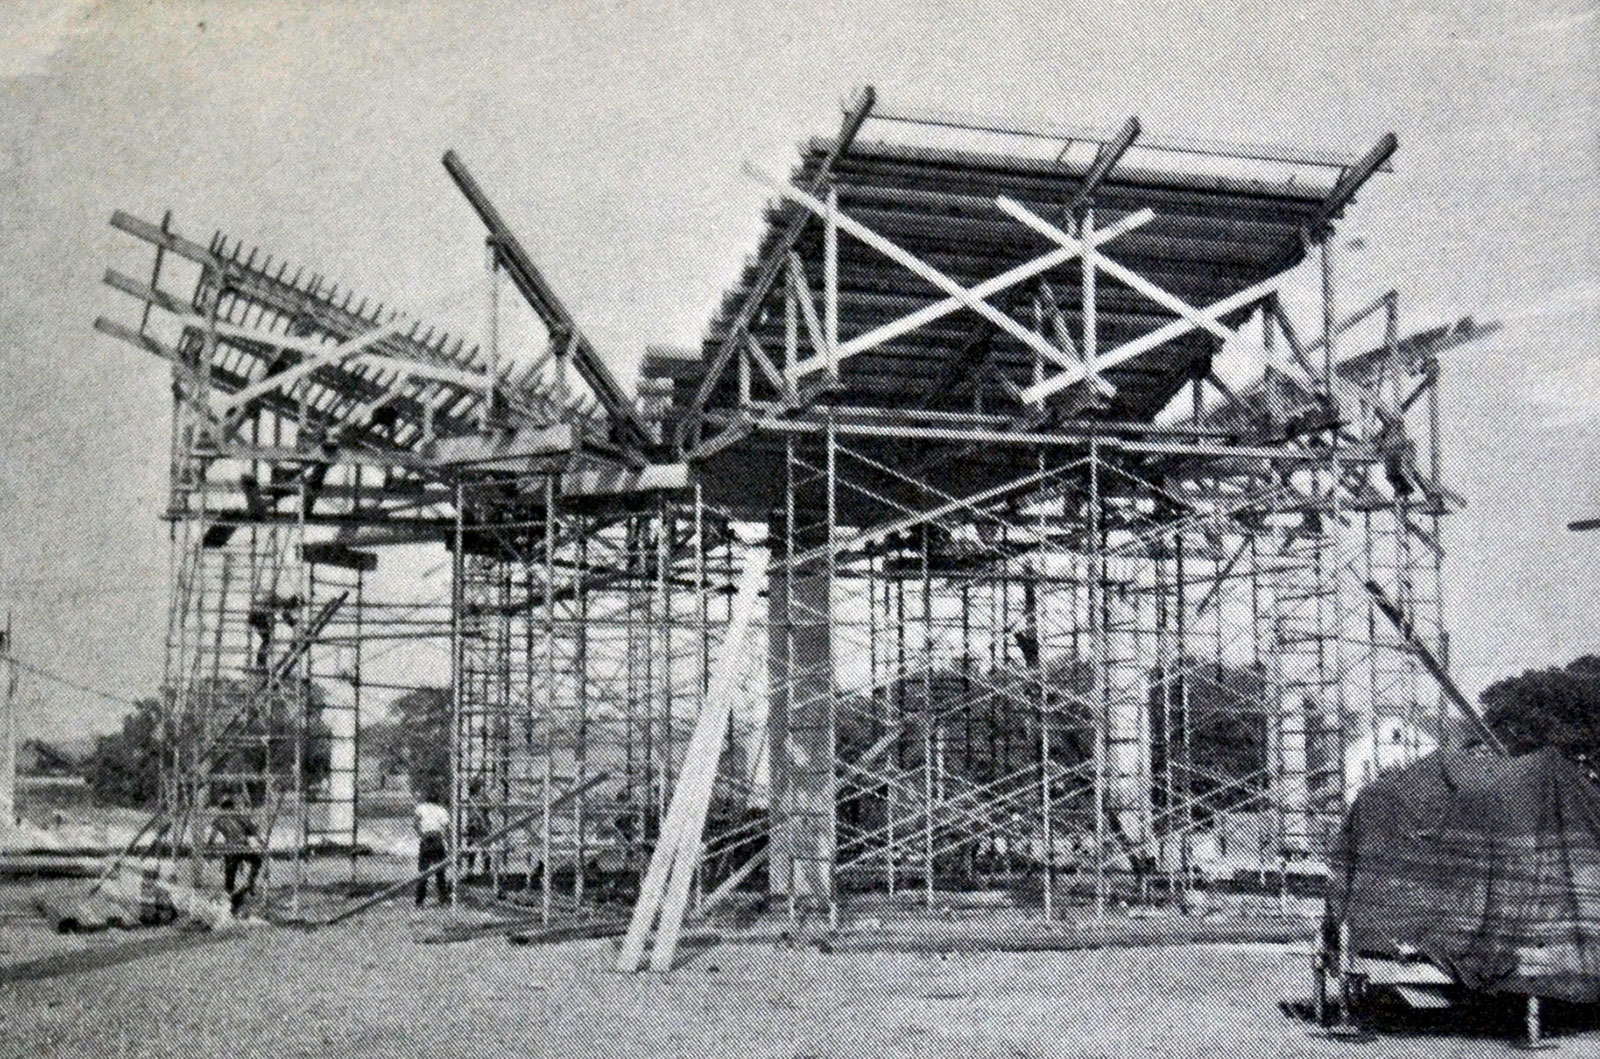 Construction Works of factory